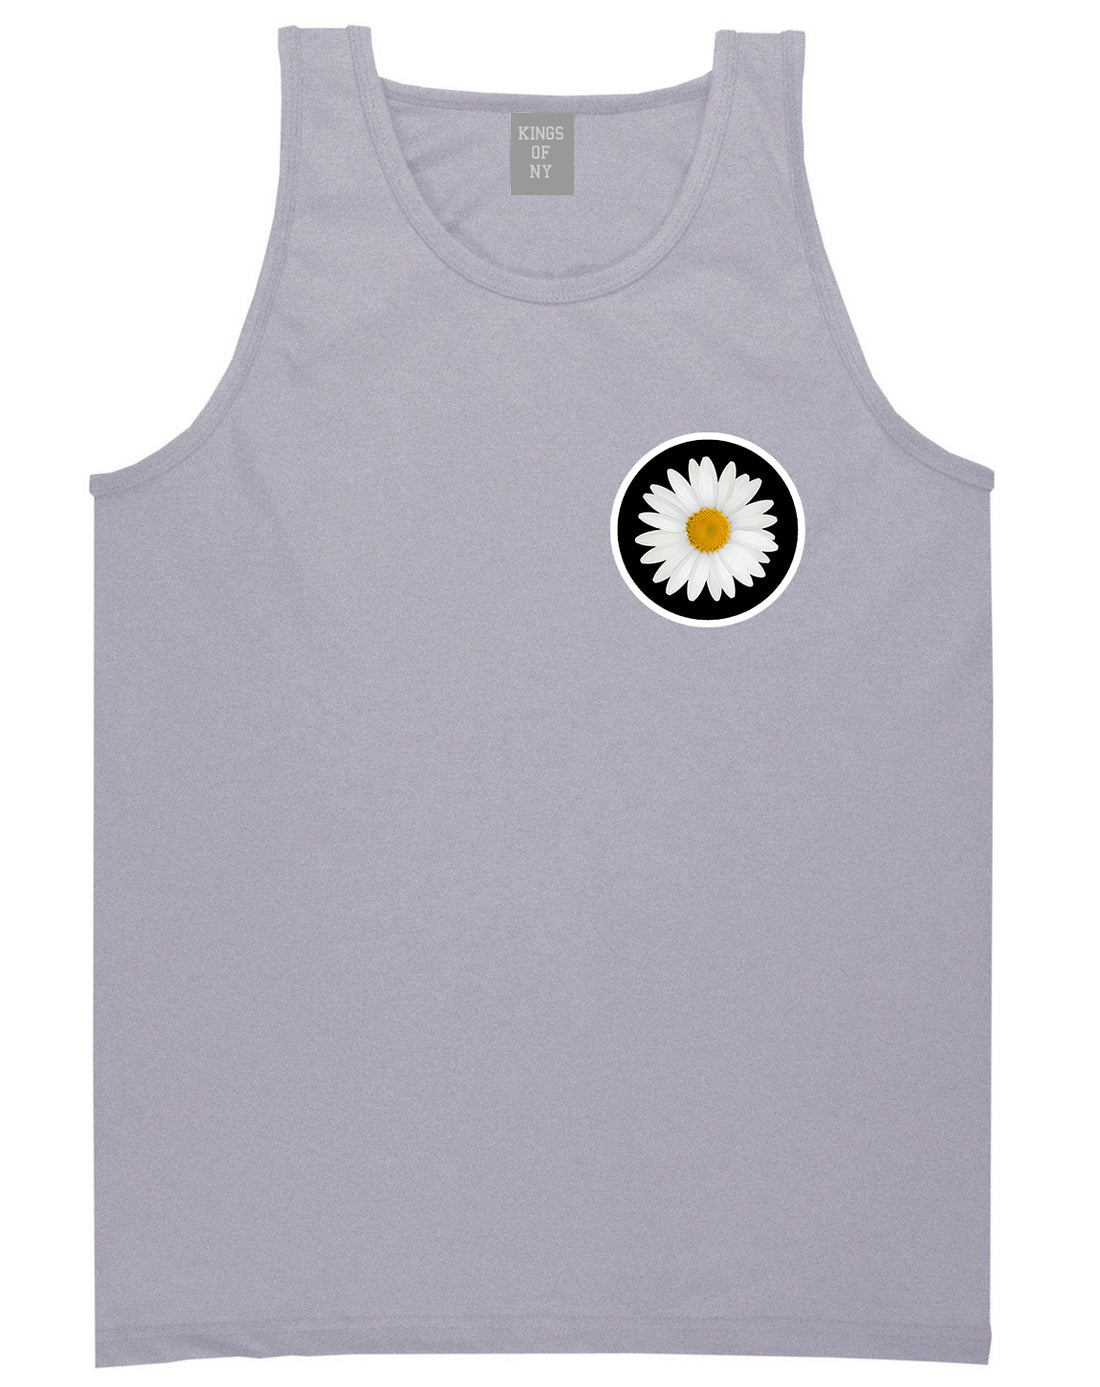 Daisy_Flower_Chest Mens Grey Tank Top Shirt by Kings Of NY